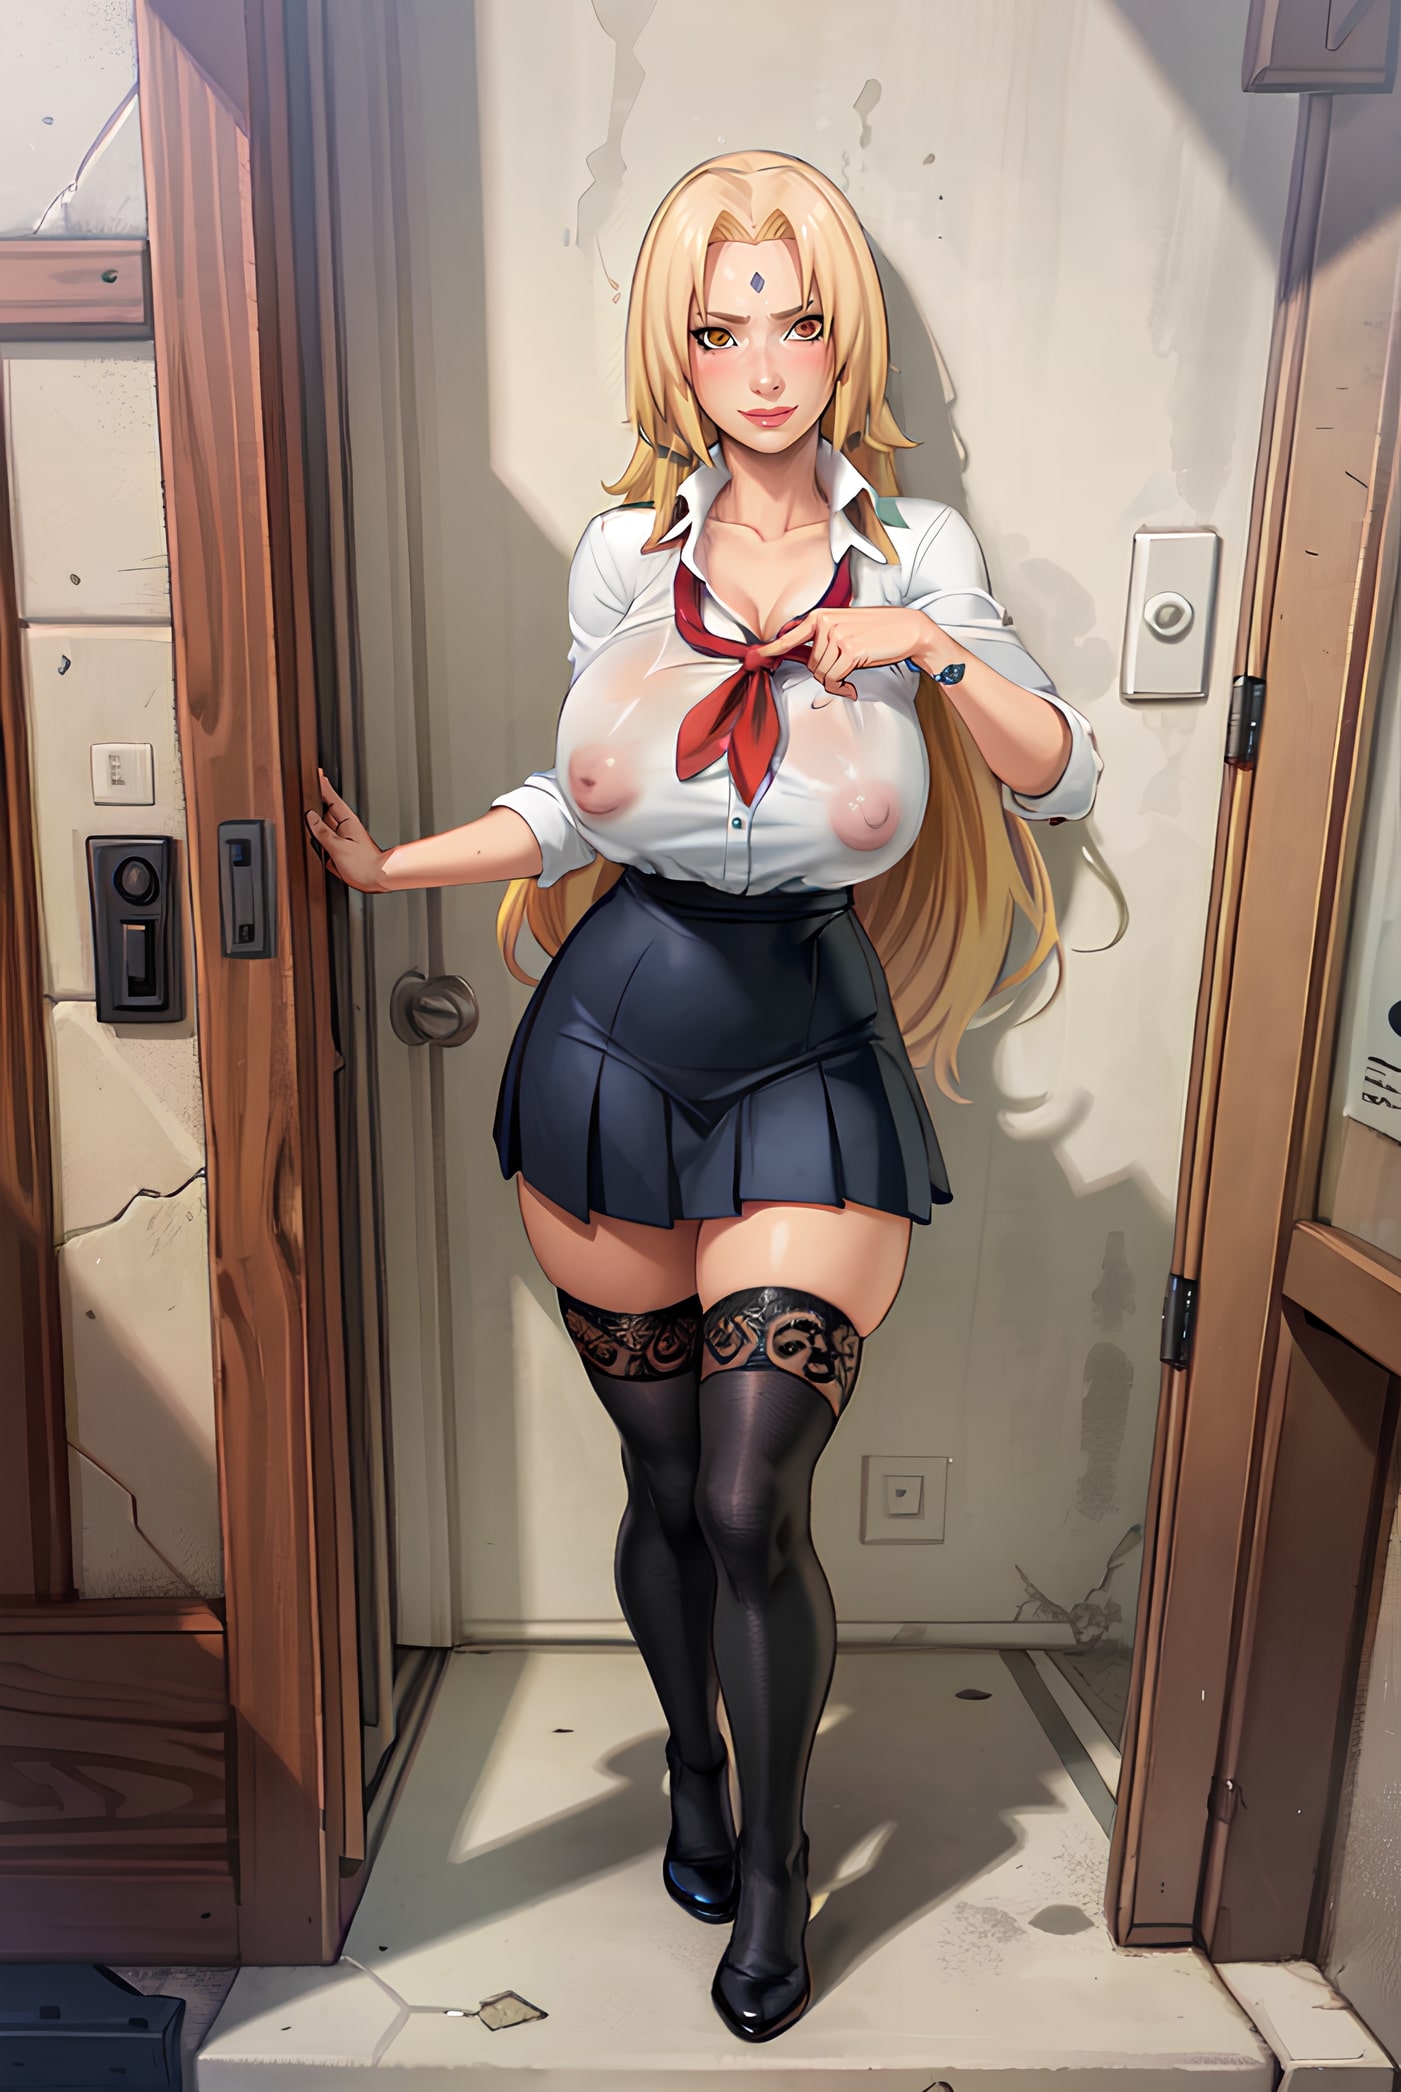 Tsunade Going to School Without Bra by hpeq